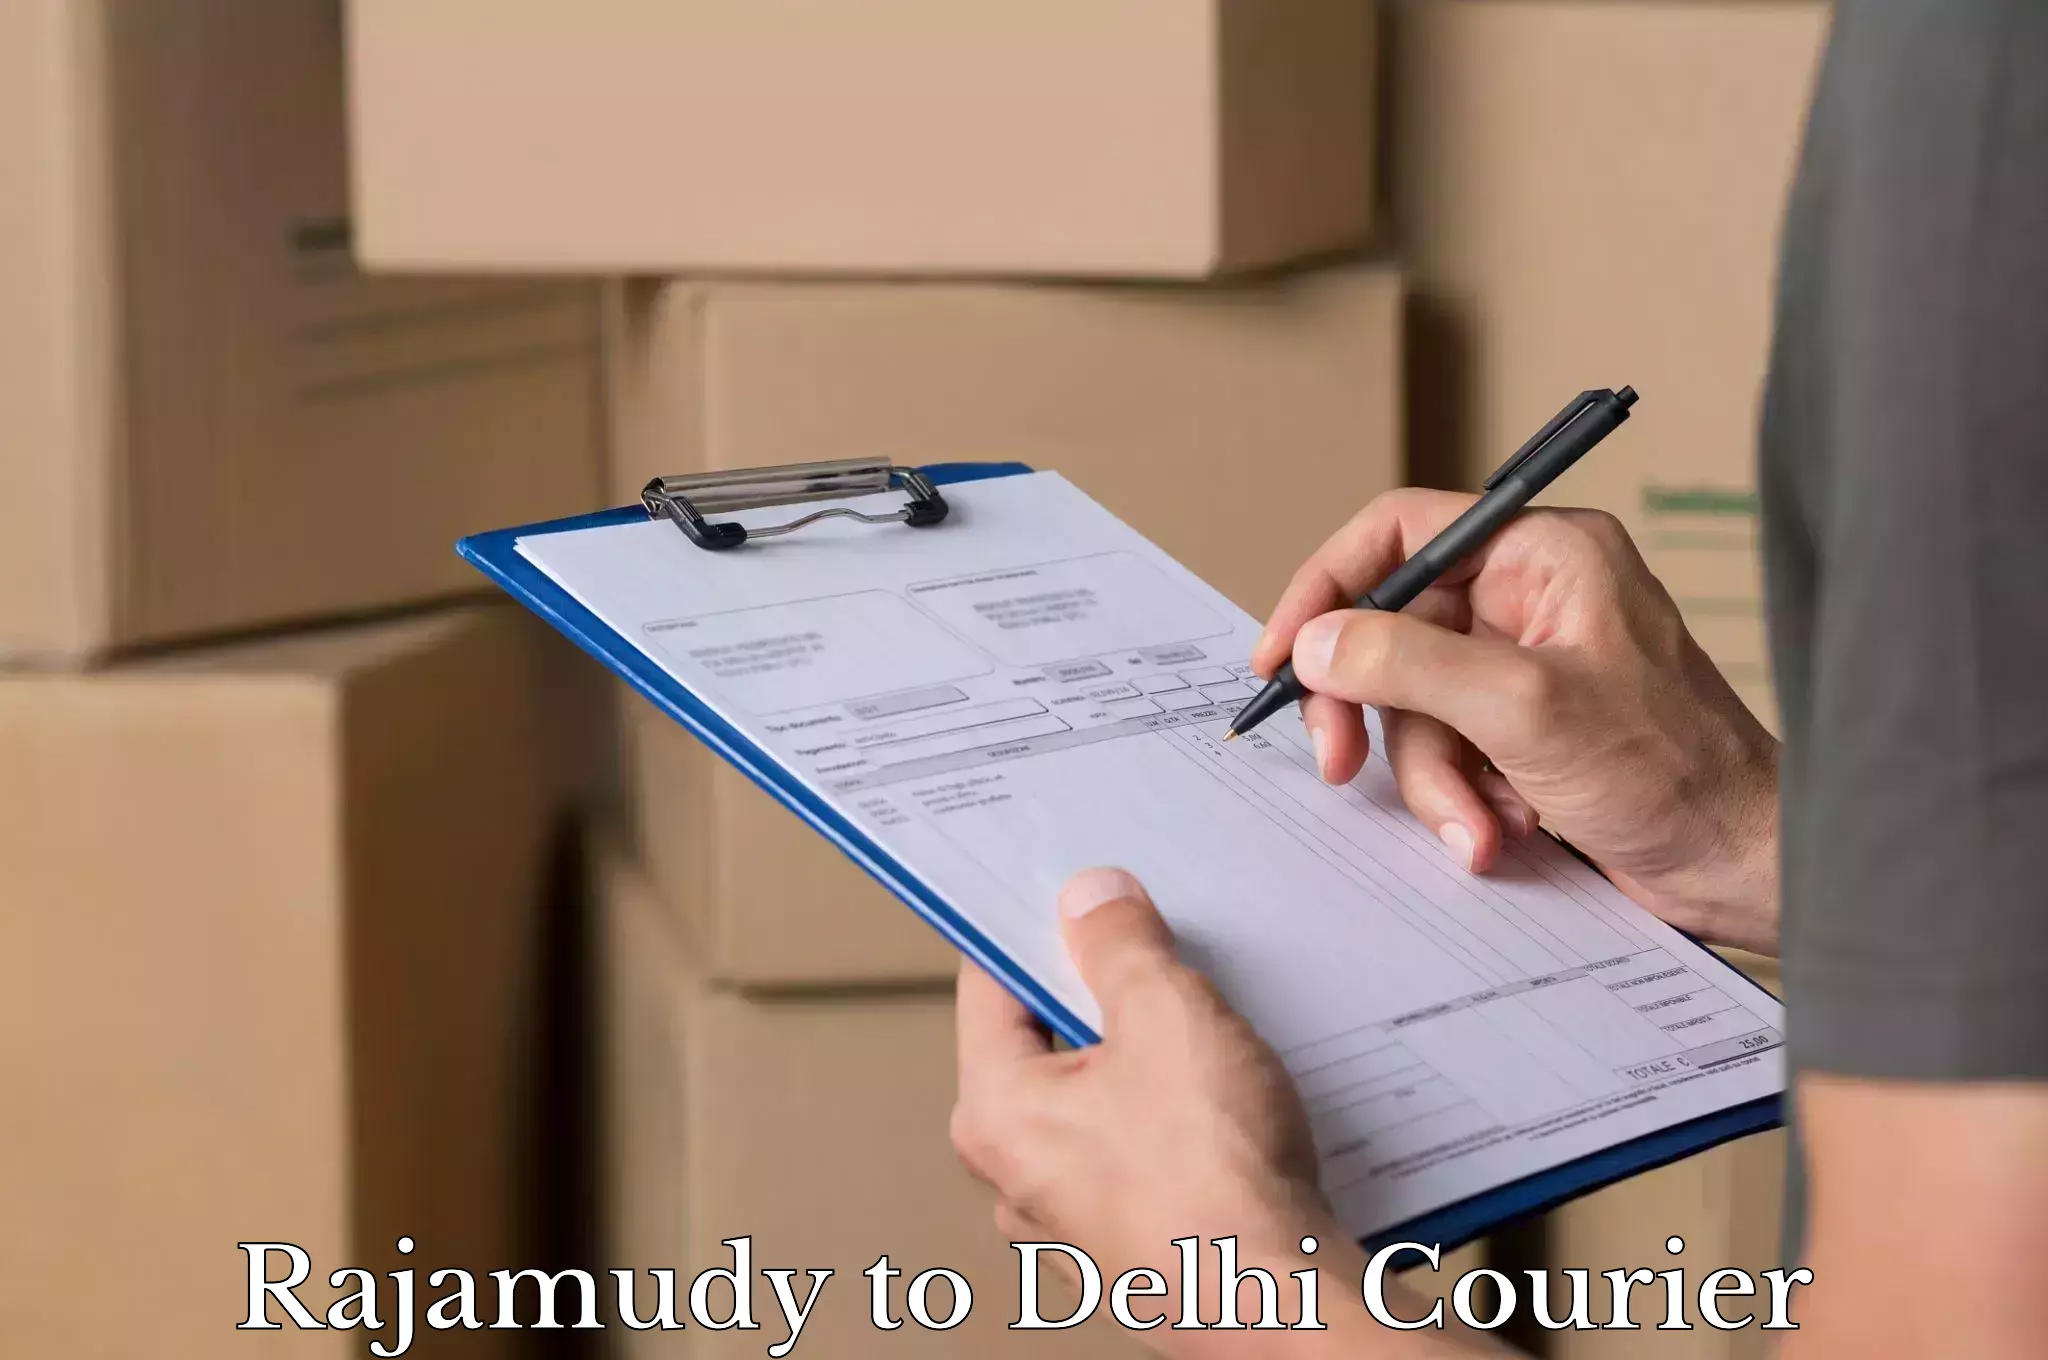 Luggage shipping specialists Rajamudy to East Delhi